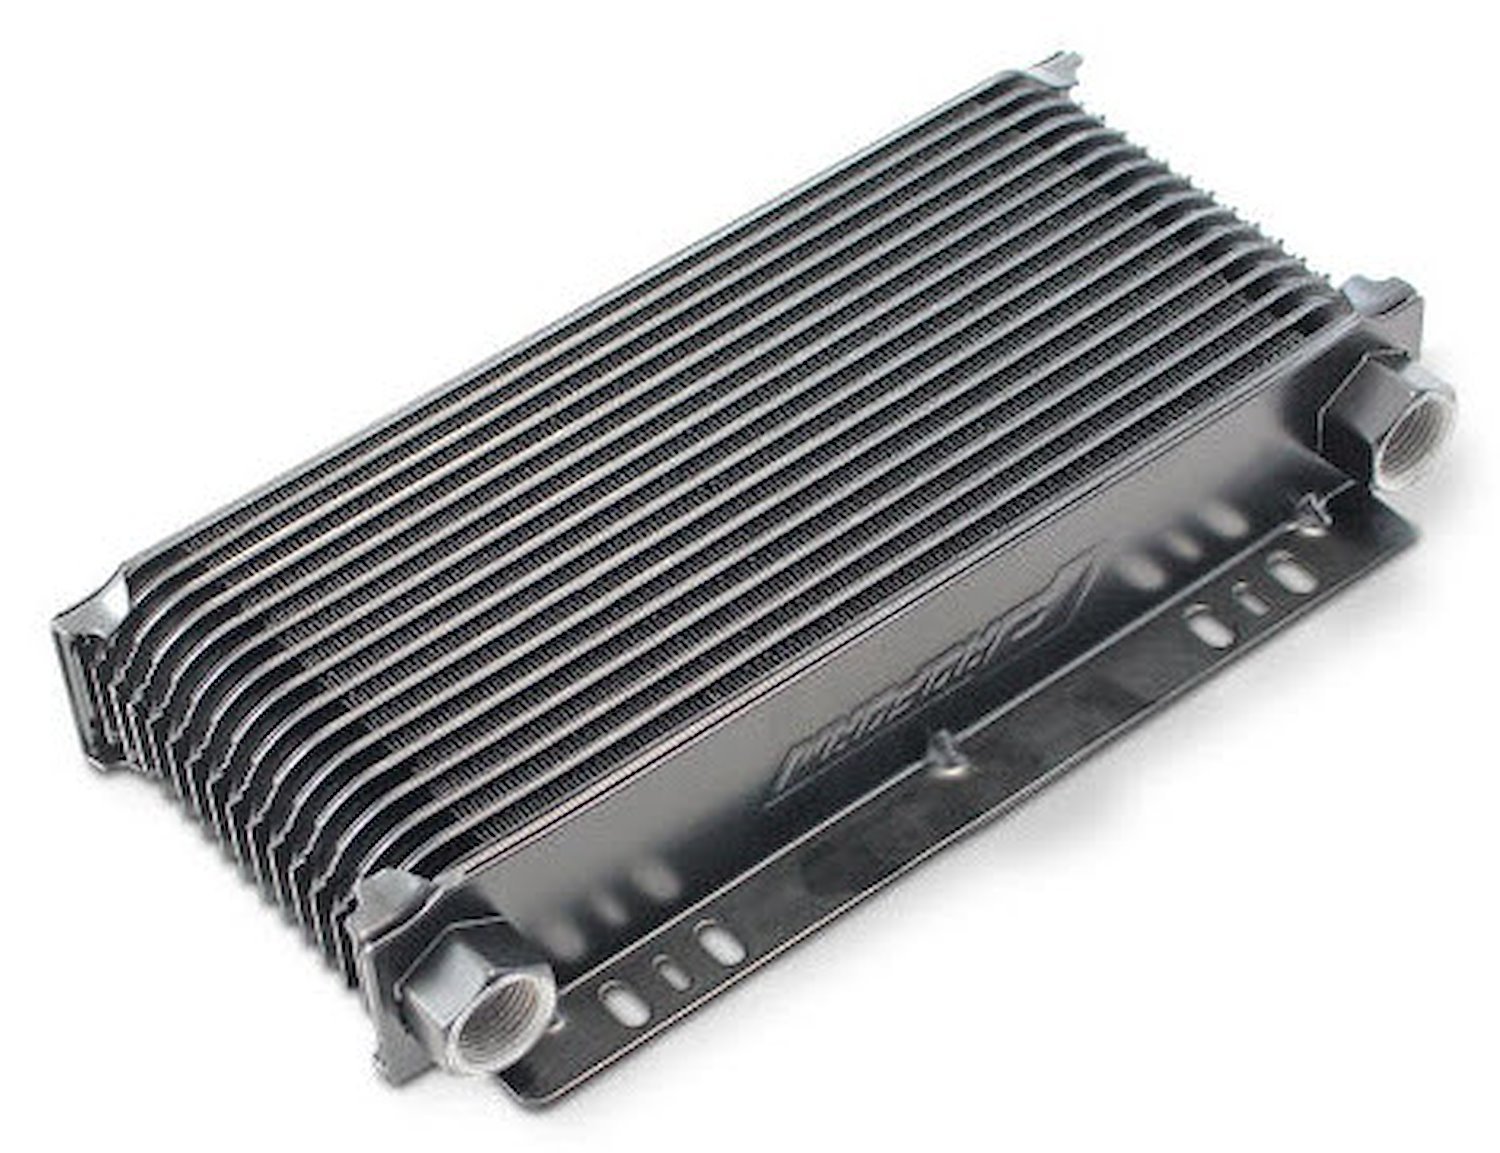 69570-16 Tundra Series Universal 16-Plate Oil & Transmission Cooler